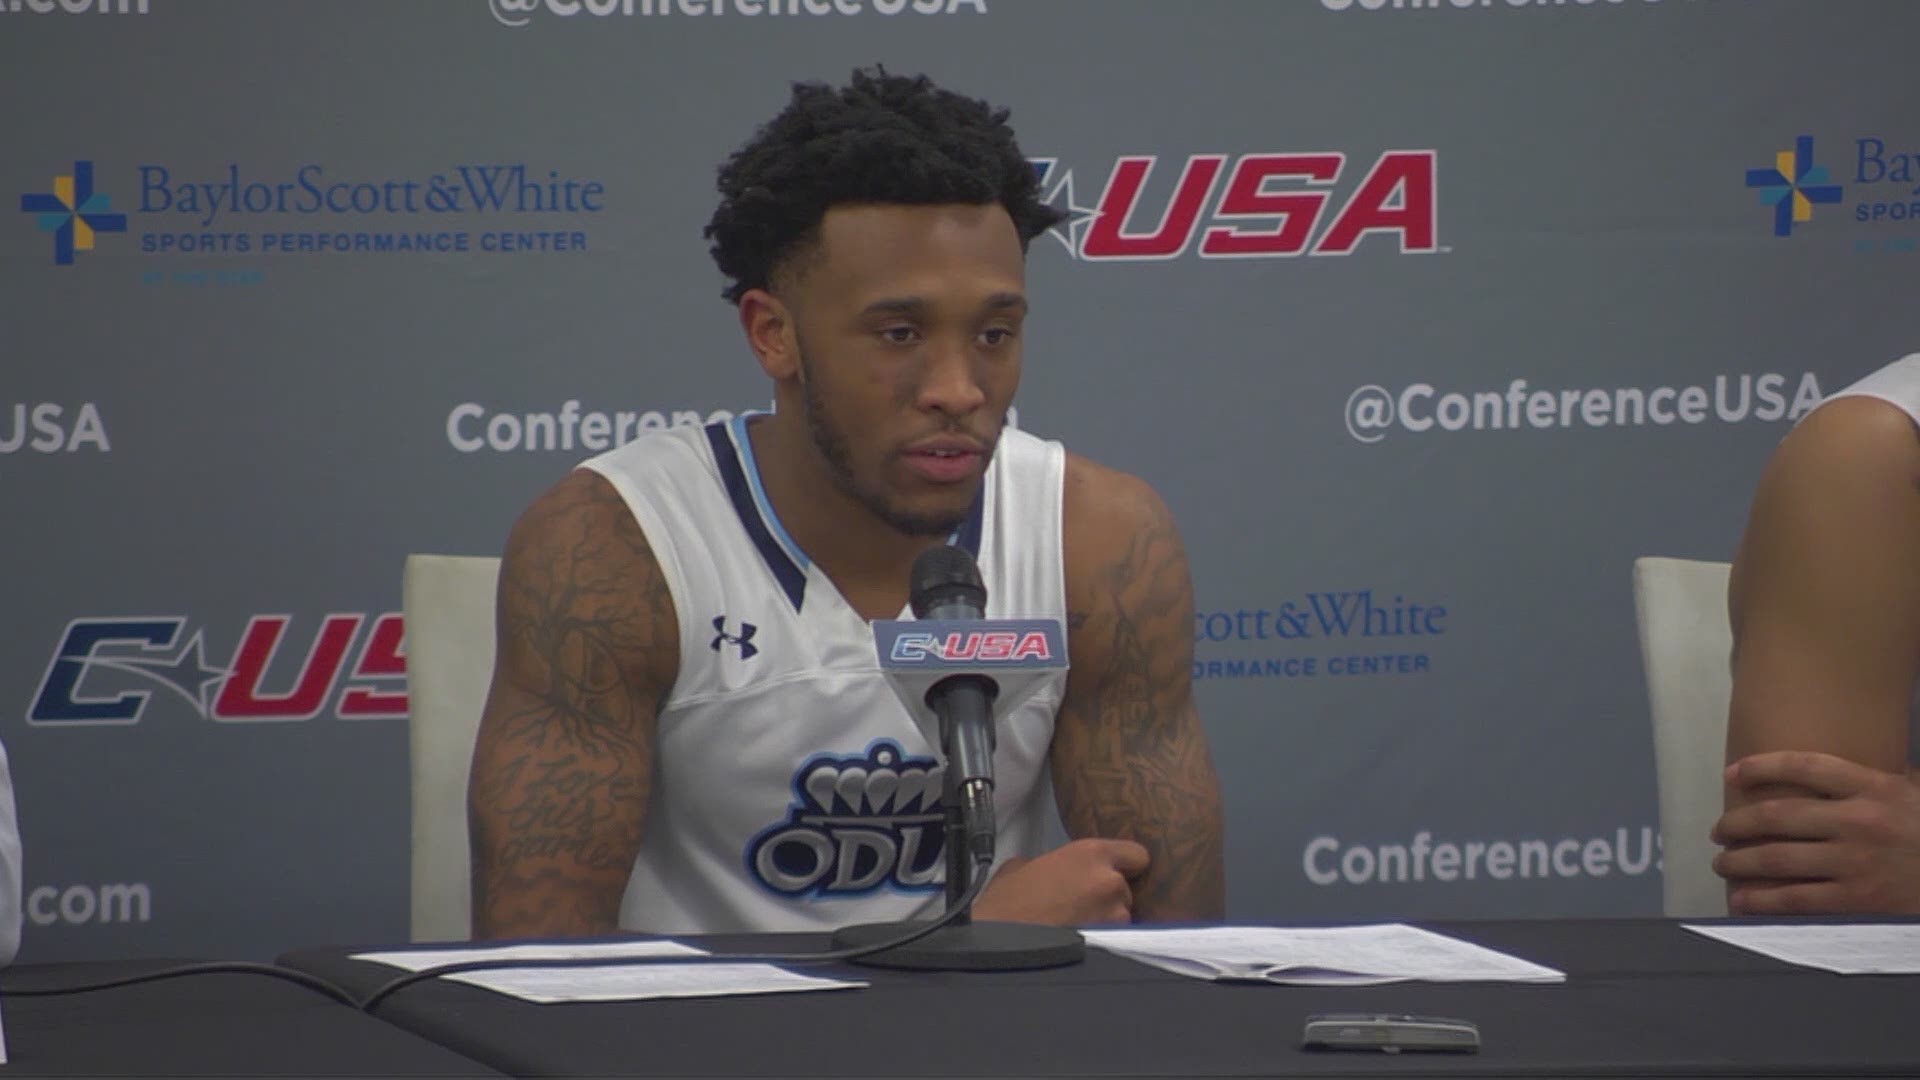 Ahmad Caver talks about the game winner and Coach Jones says the Monarchs were fortunate.